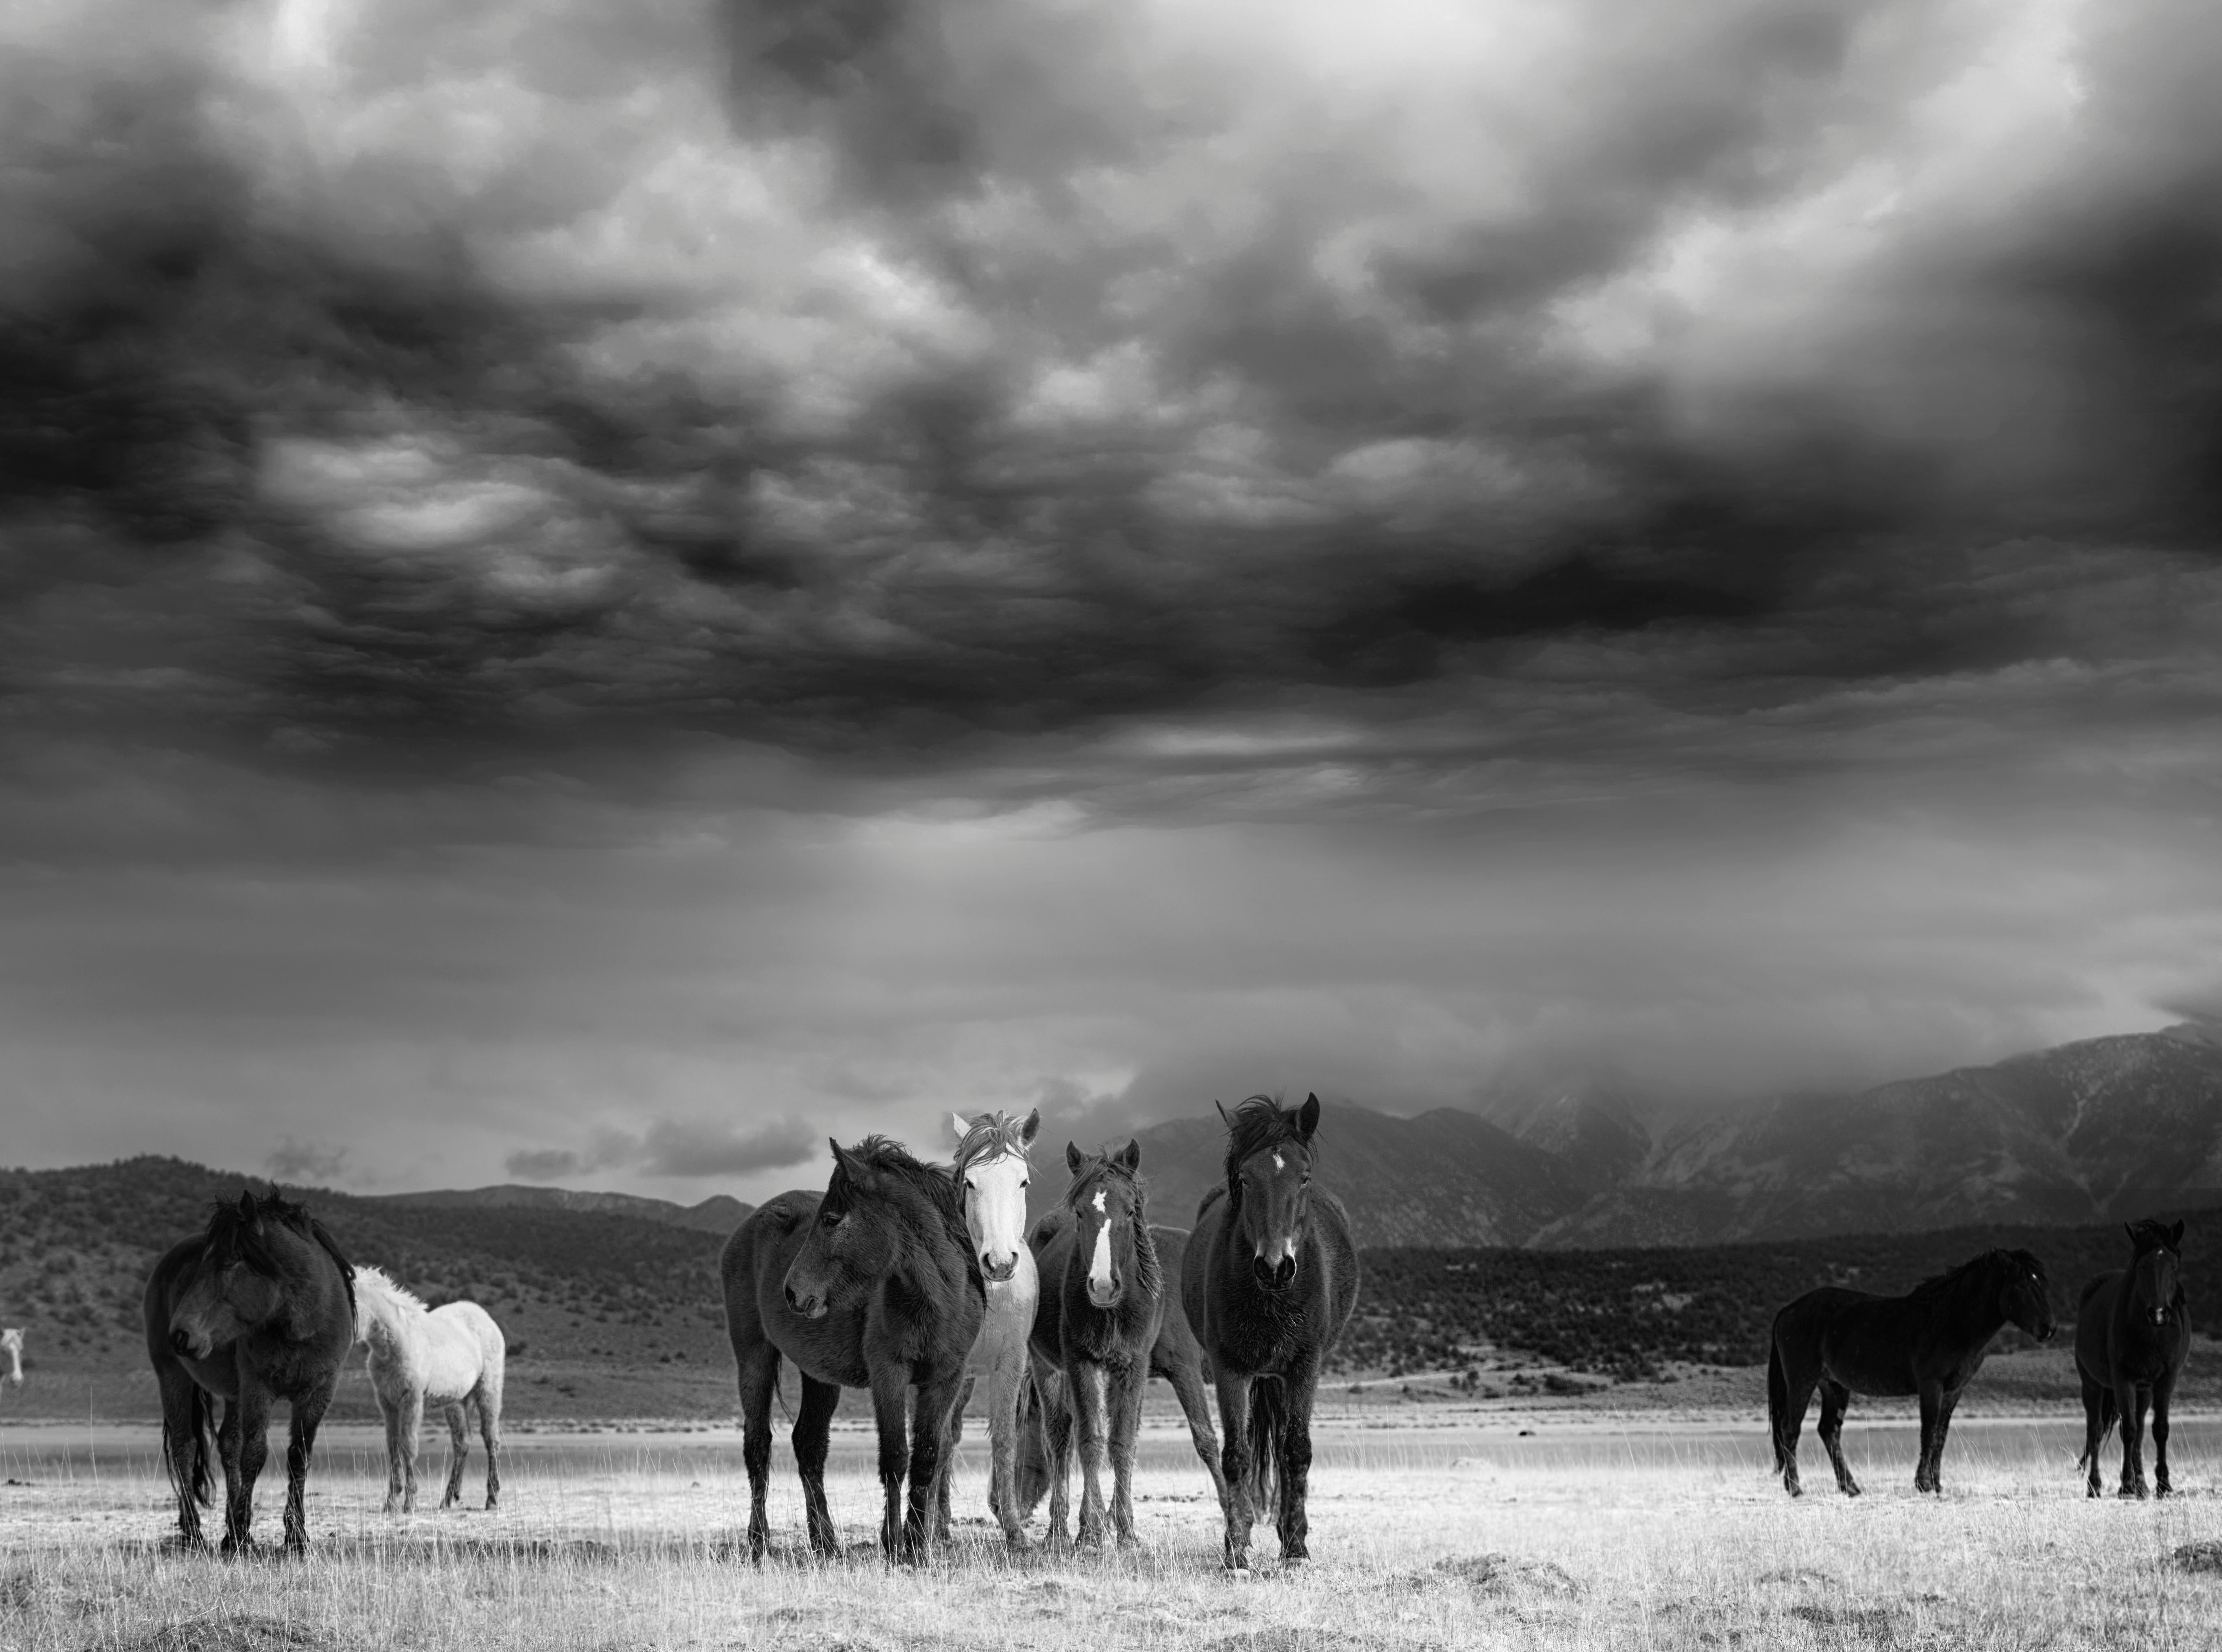 This is a contemporary black and white photograph of American Wild Mustangs. 
"They represent the ultimate expression of American freedom" - Wild Horses
36x48 Edition of 12. 
Printed in archival luster paper w archival inks
Signed and numbered by